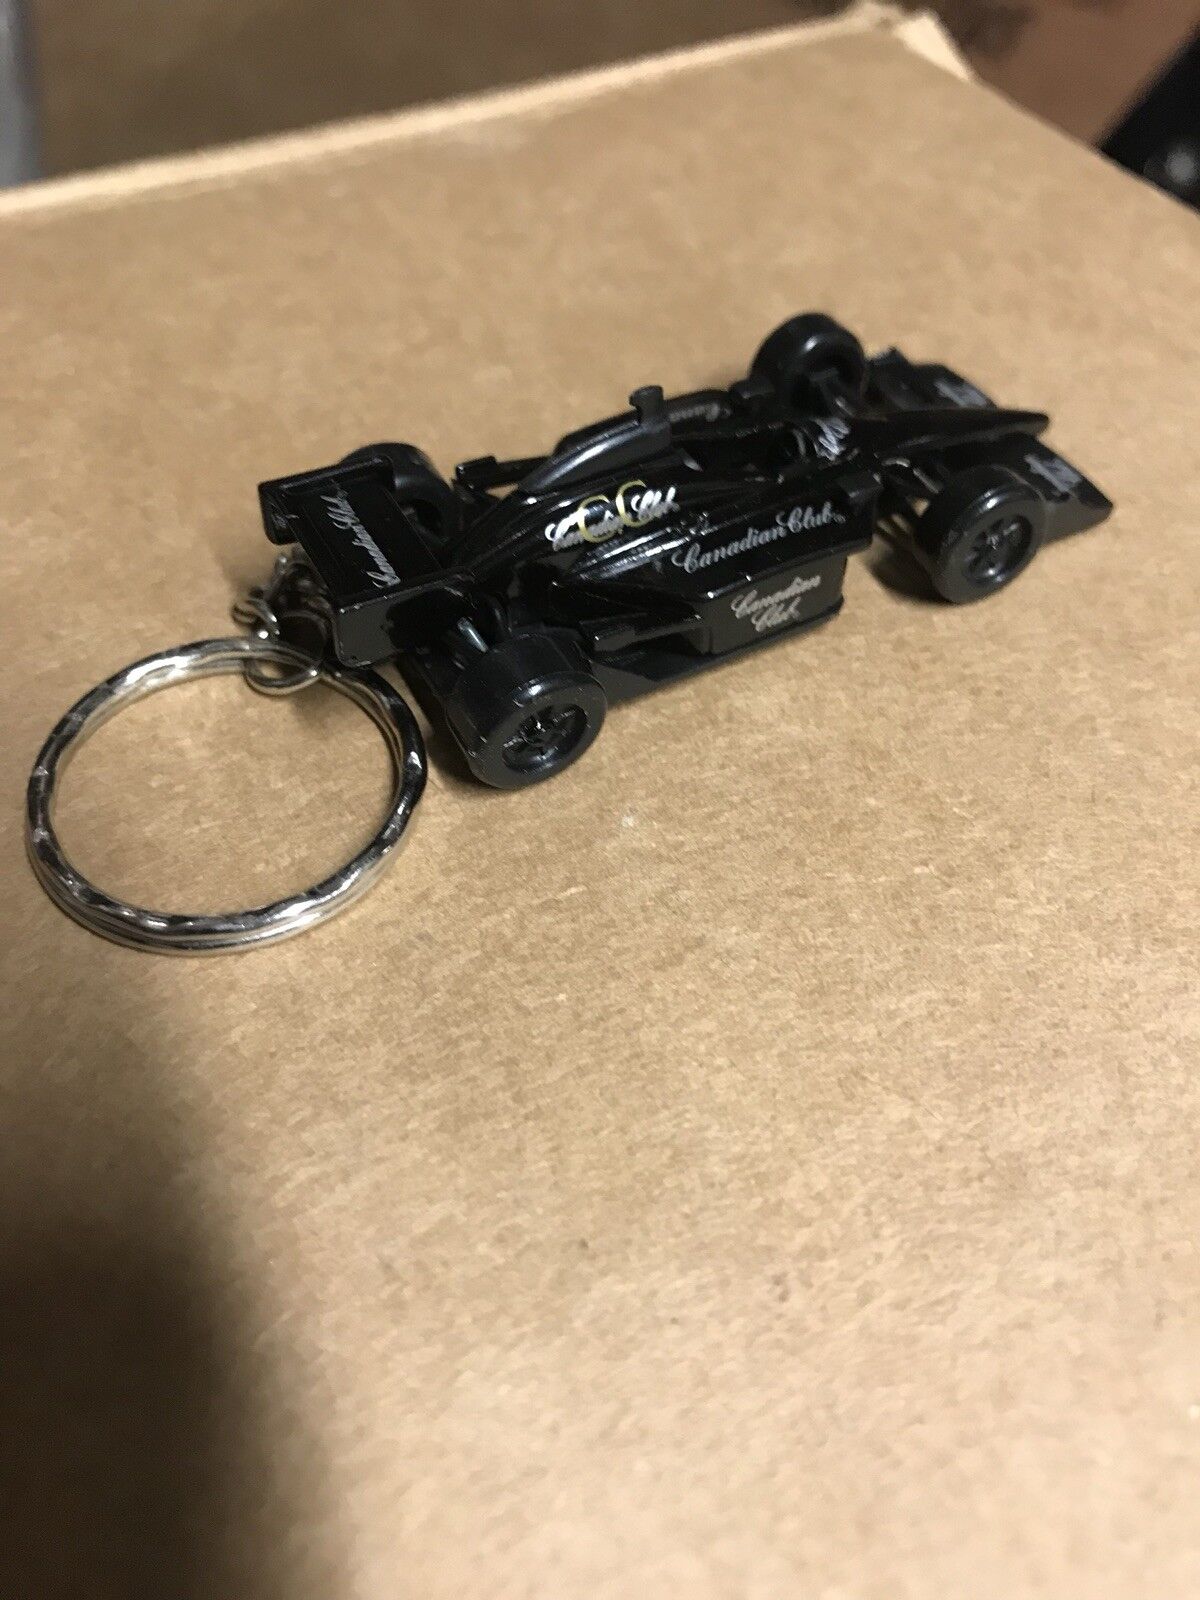 Canadian club indy car.  Key chain new and unused